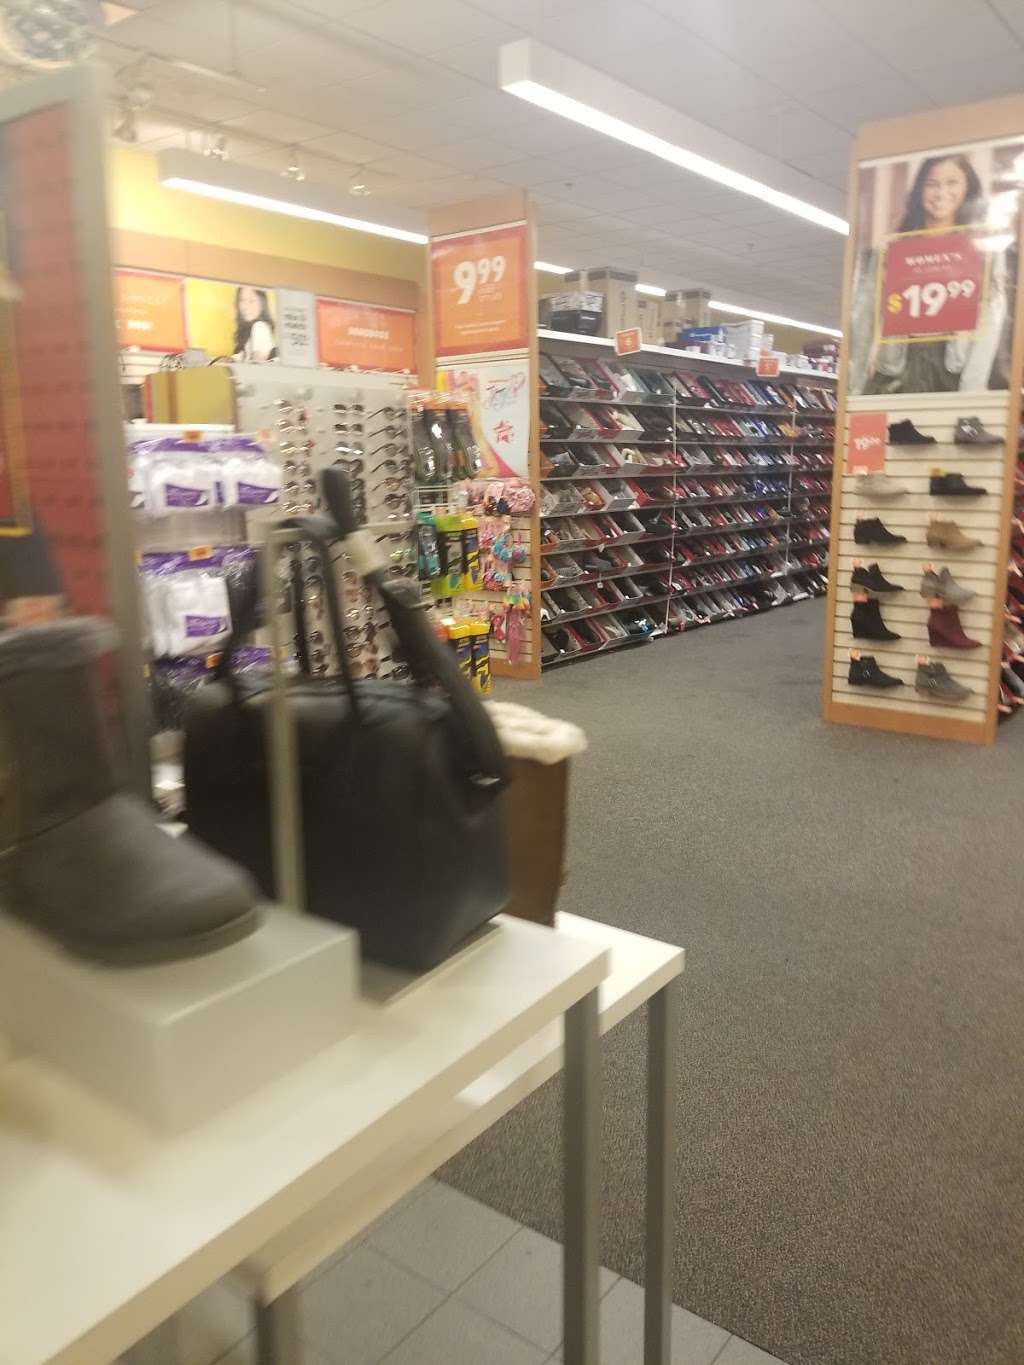 Payless ShoeSource | 257 Lehigh Valley Mall, Whitehall, PA 18052 | Phone: (610) 264-2201